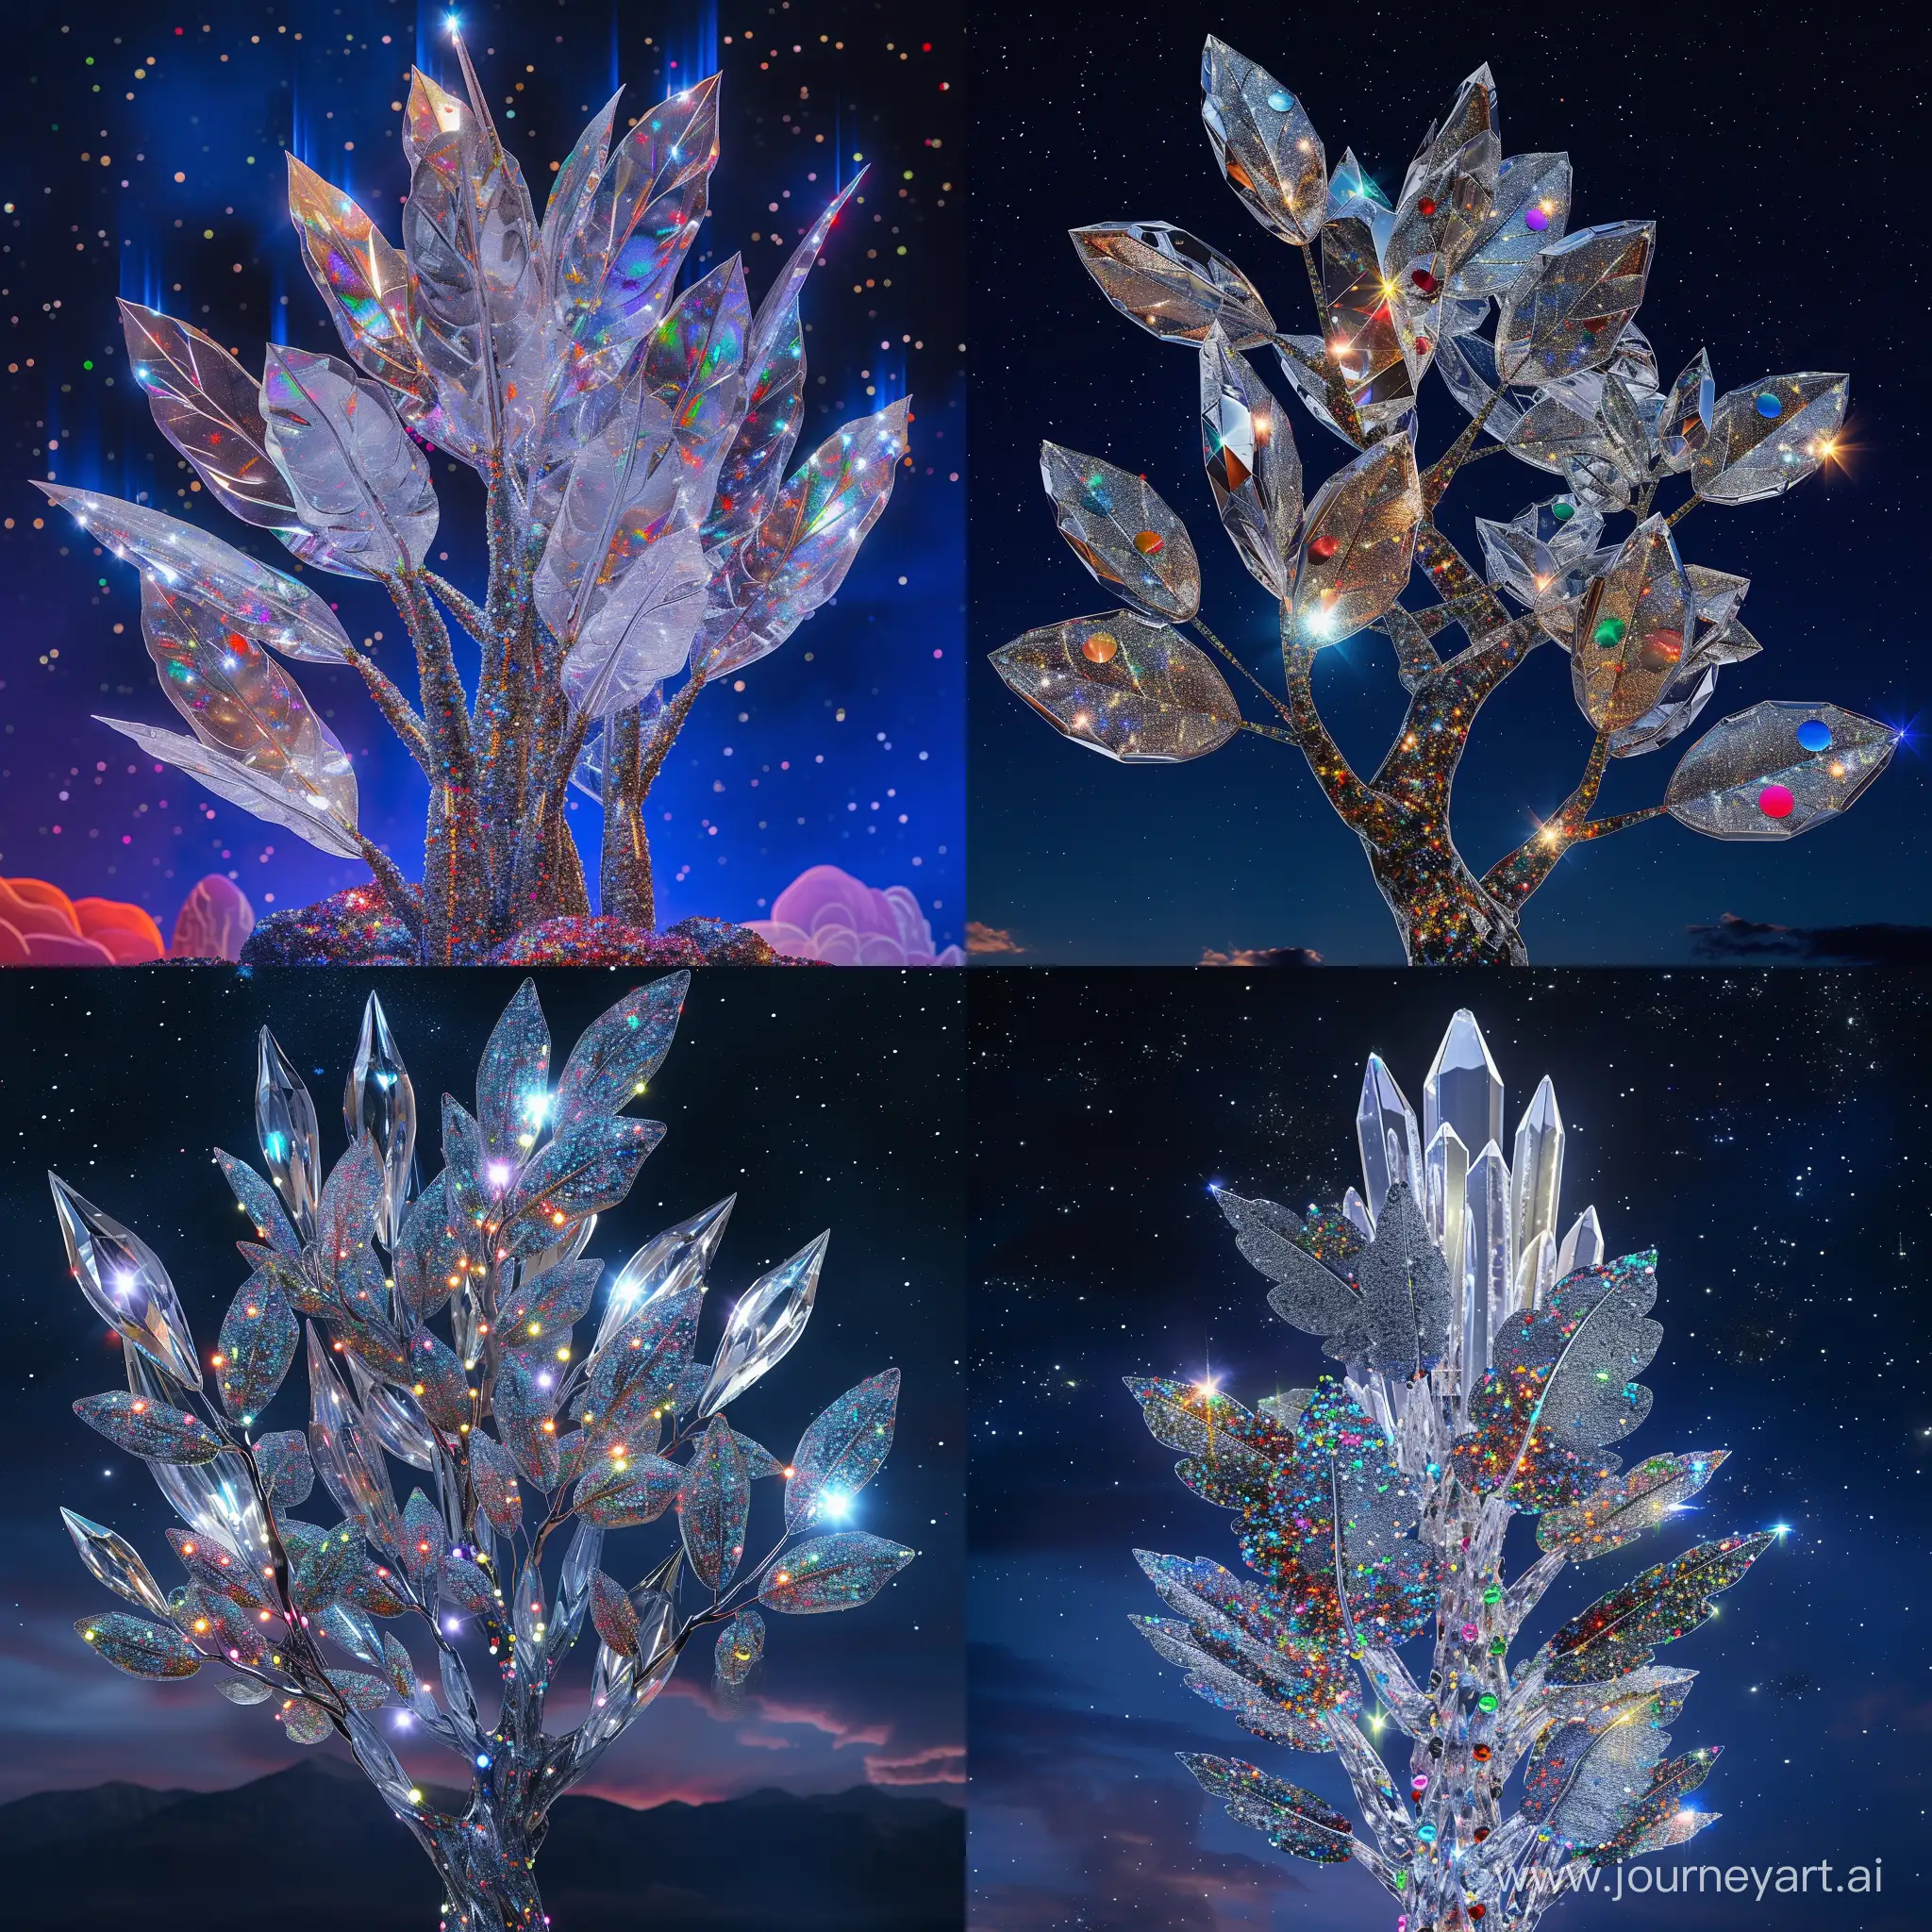 Shimmering-Silver-Leaves-on-Fabulous-Crystal-Tree-Against-Night-Sky